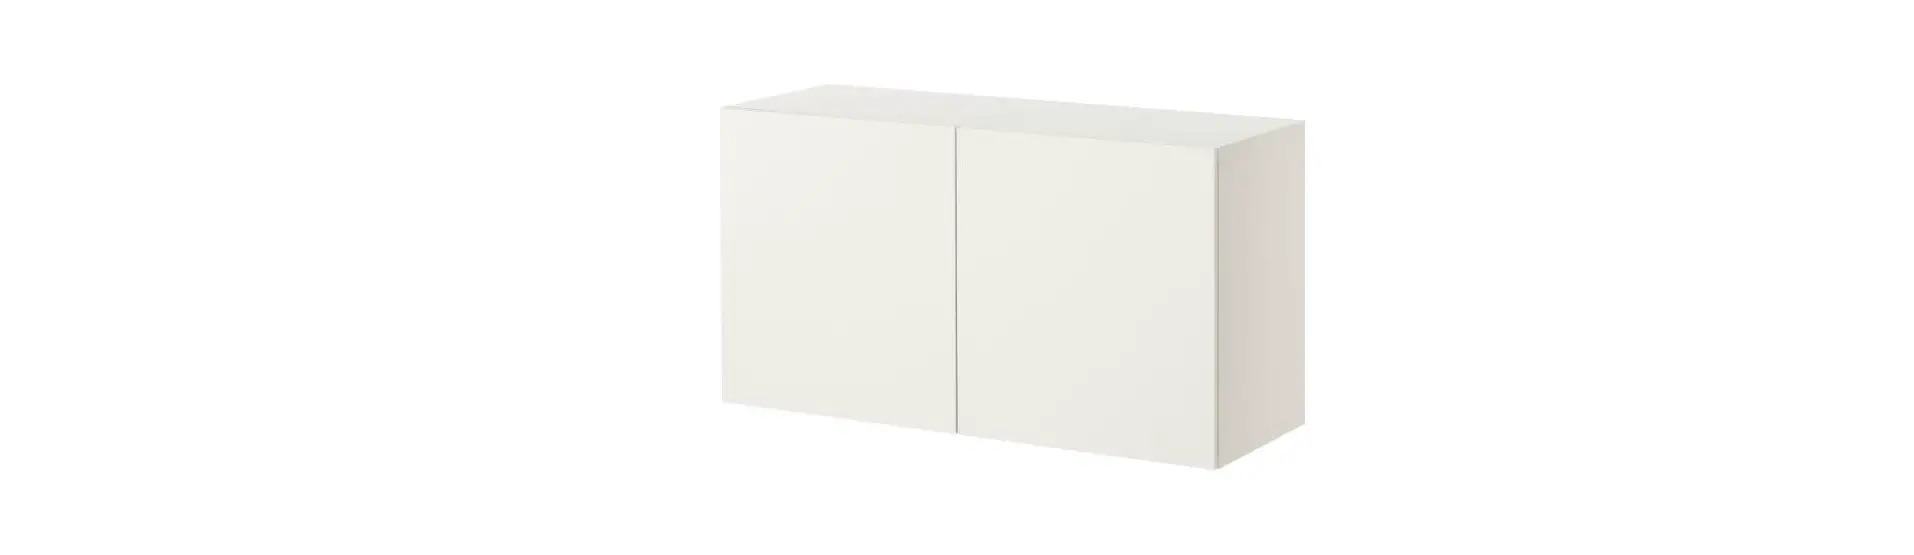 BESTÅ 394.416.15 Wall Mounted Cabinet Combination